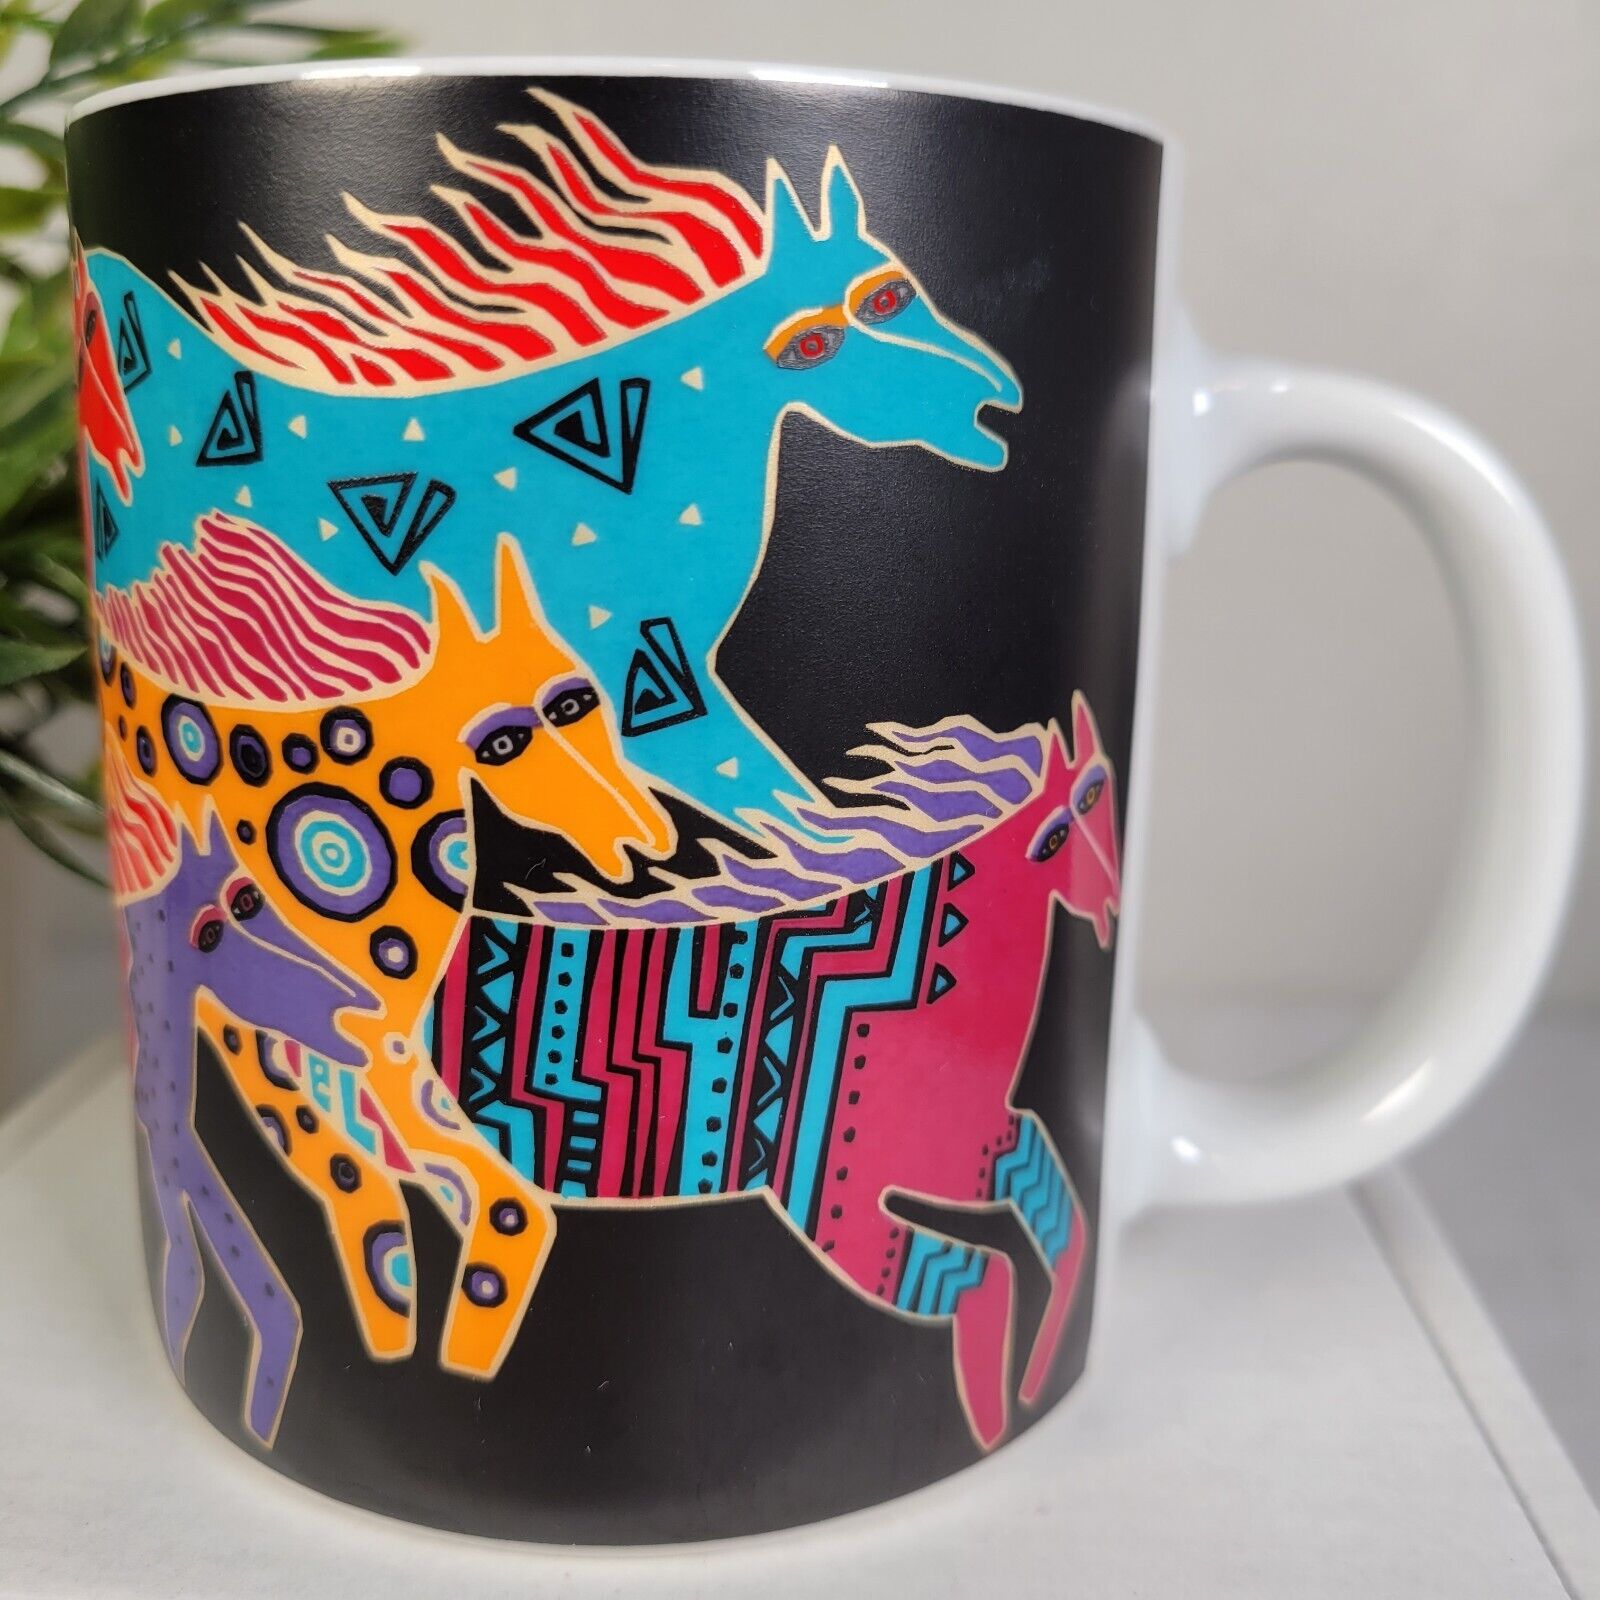 1995 Laurel Burch Coffee Mug Horses Mythical Menagerie Colorful